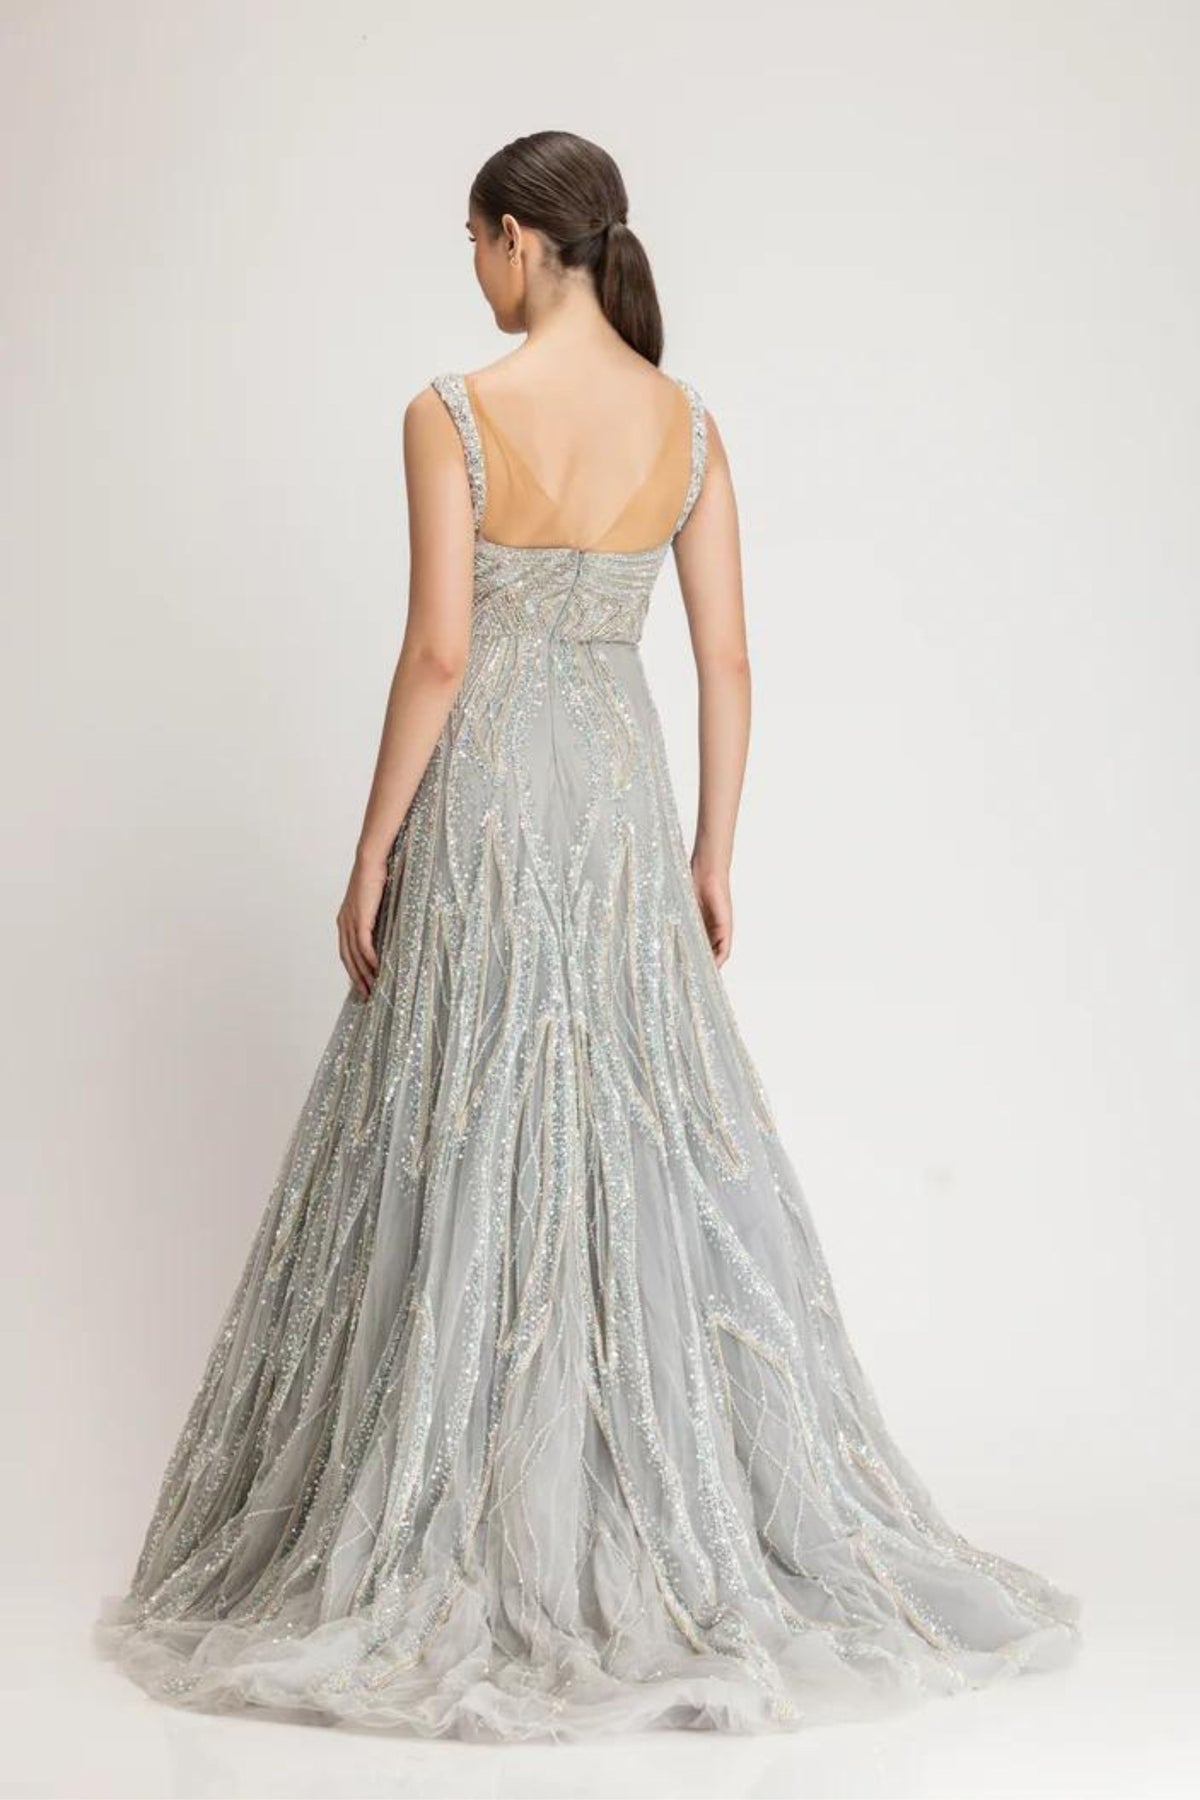 Silver blue flare gown